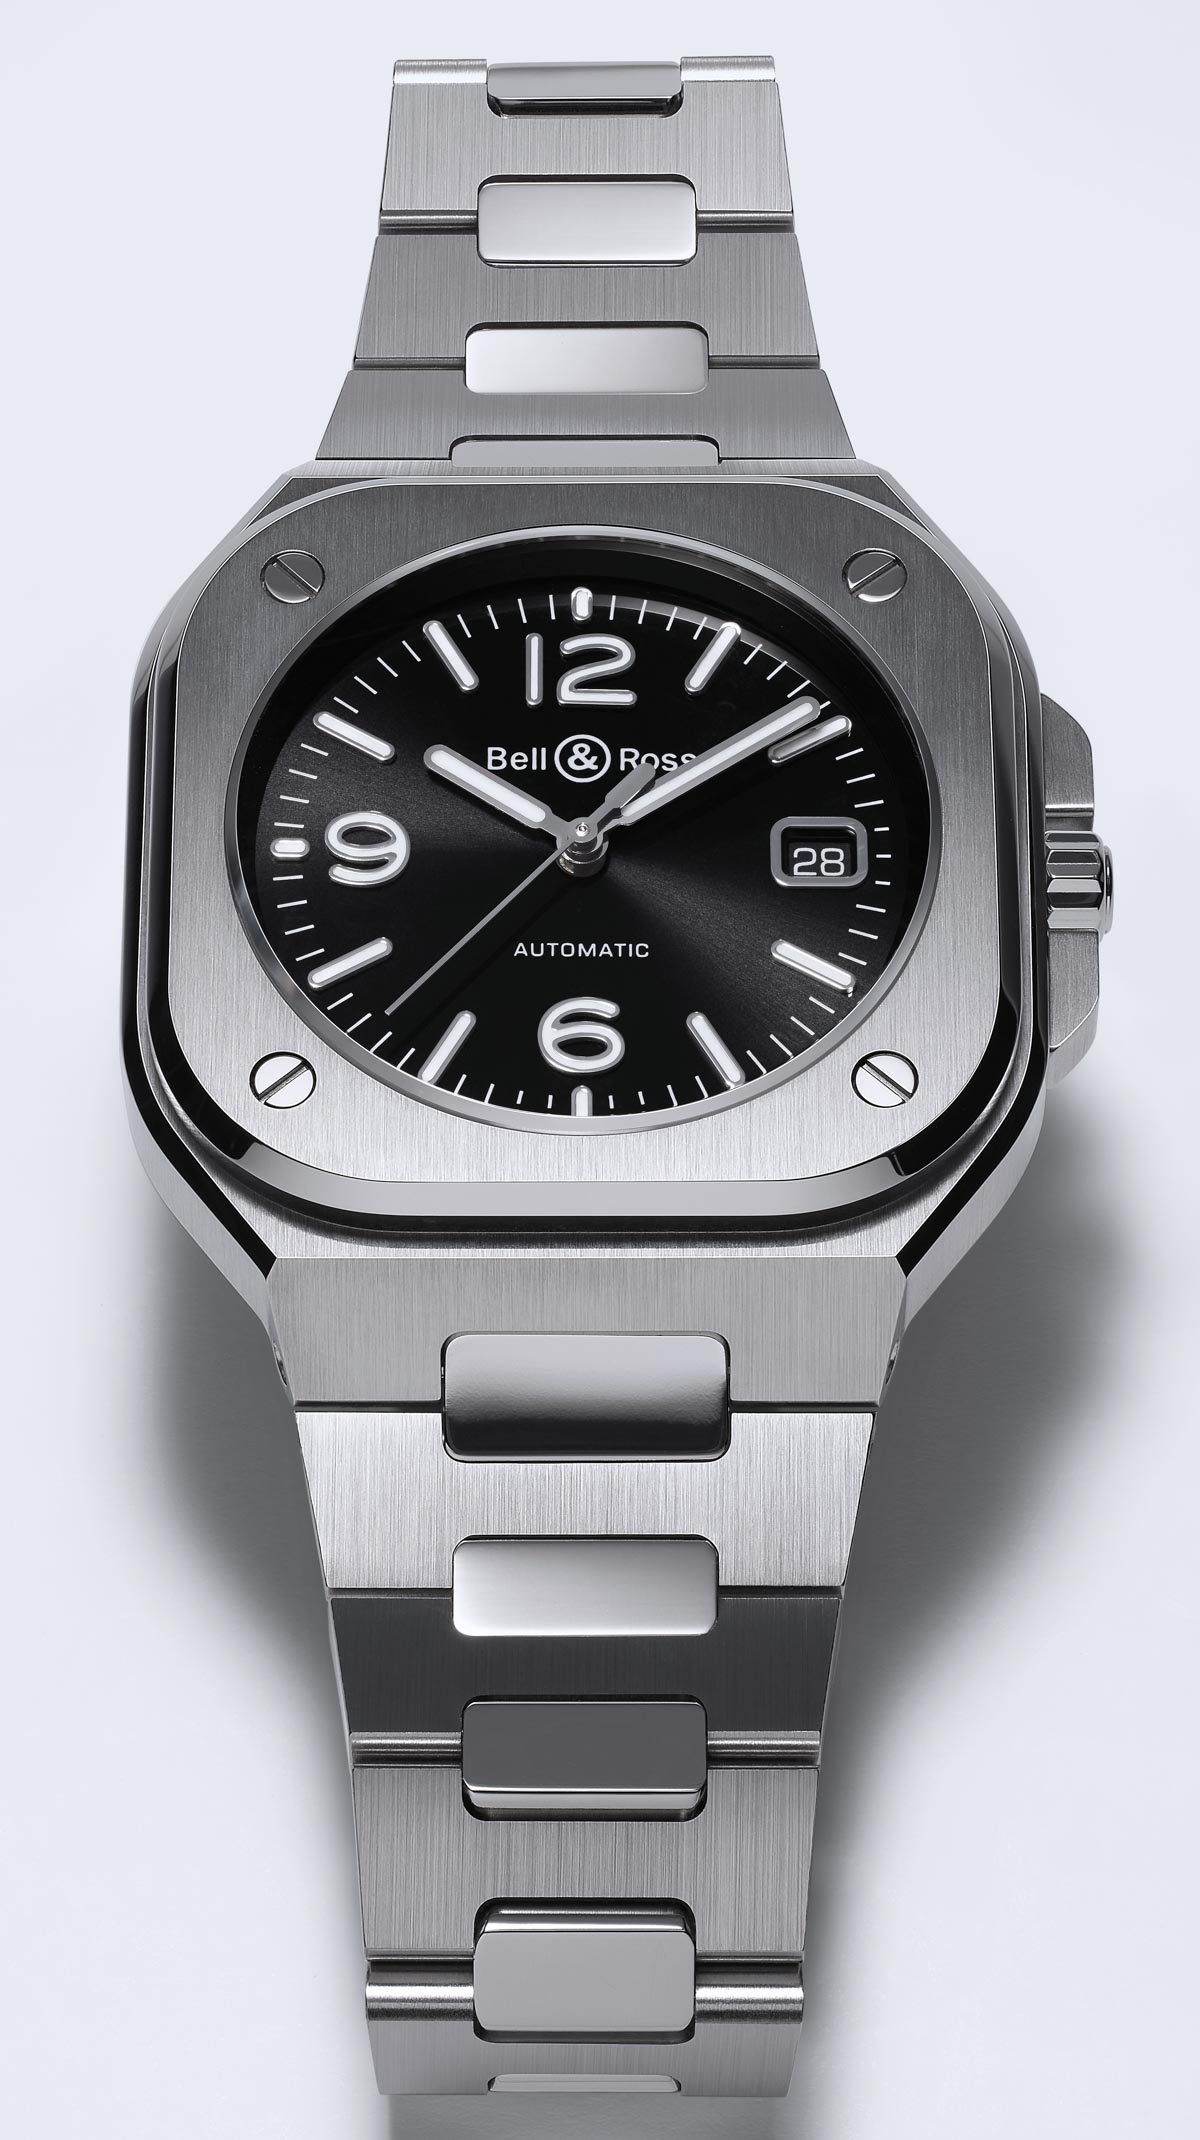 Introducing The Bell & Ross BR 05 Watch Collection Watch Releases 